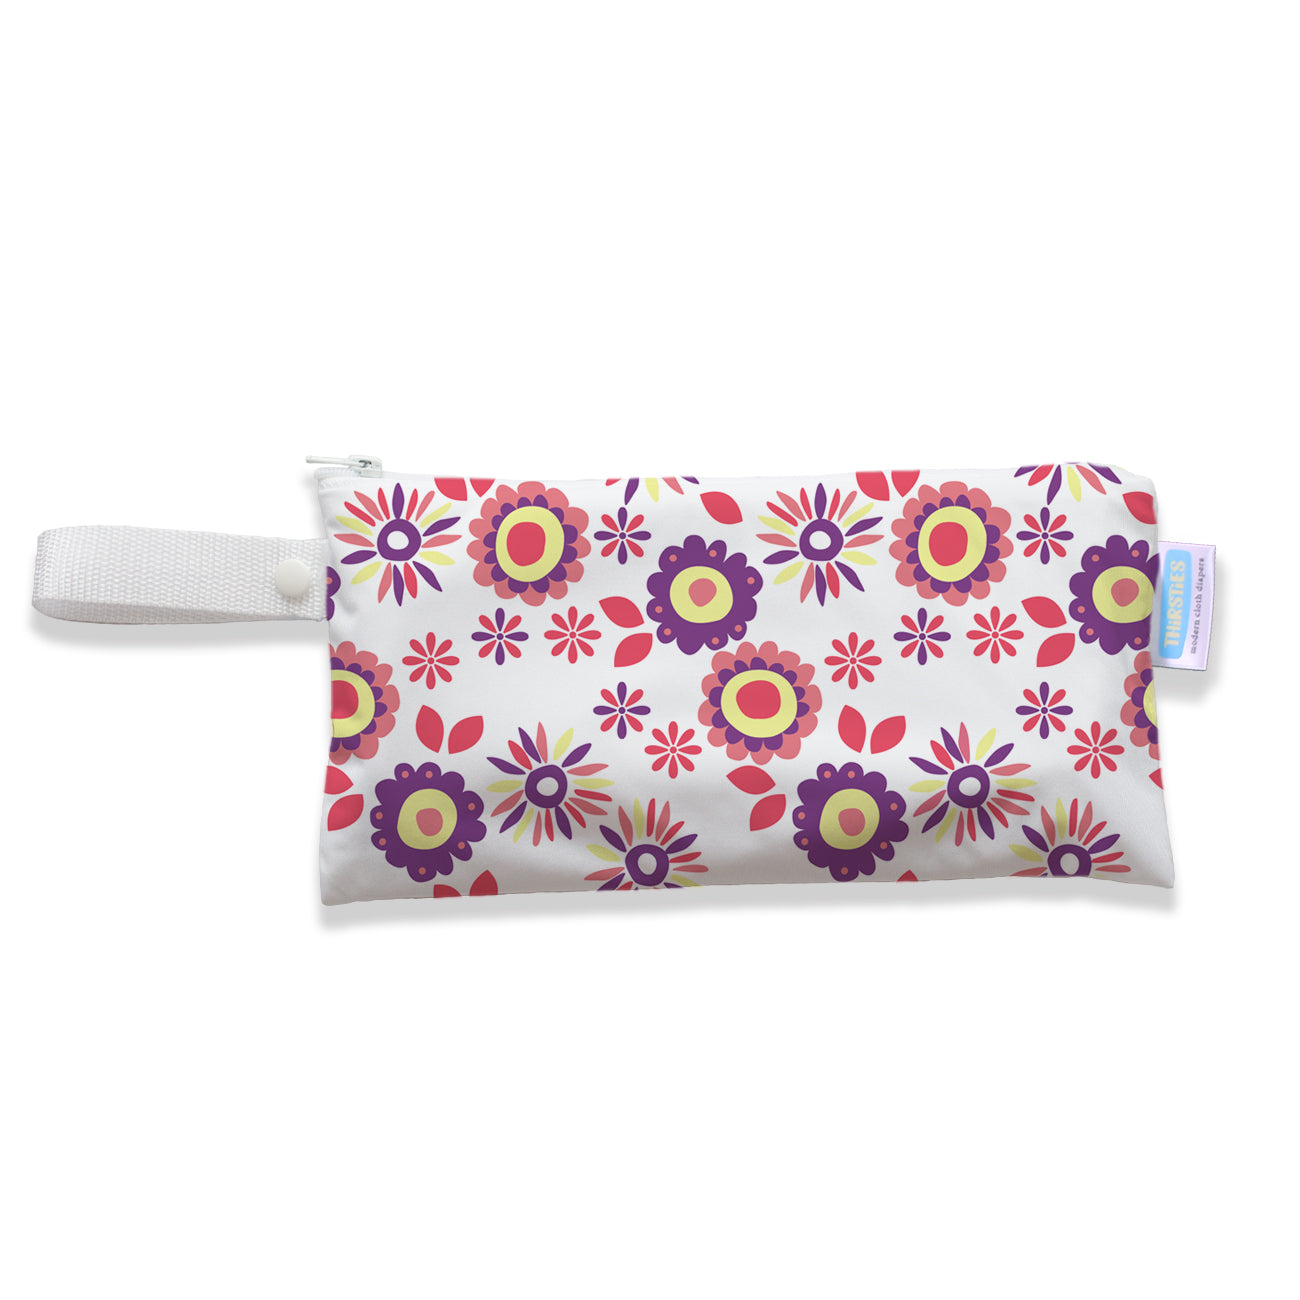 Clutch Bag Tulips Discontinued